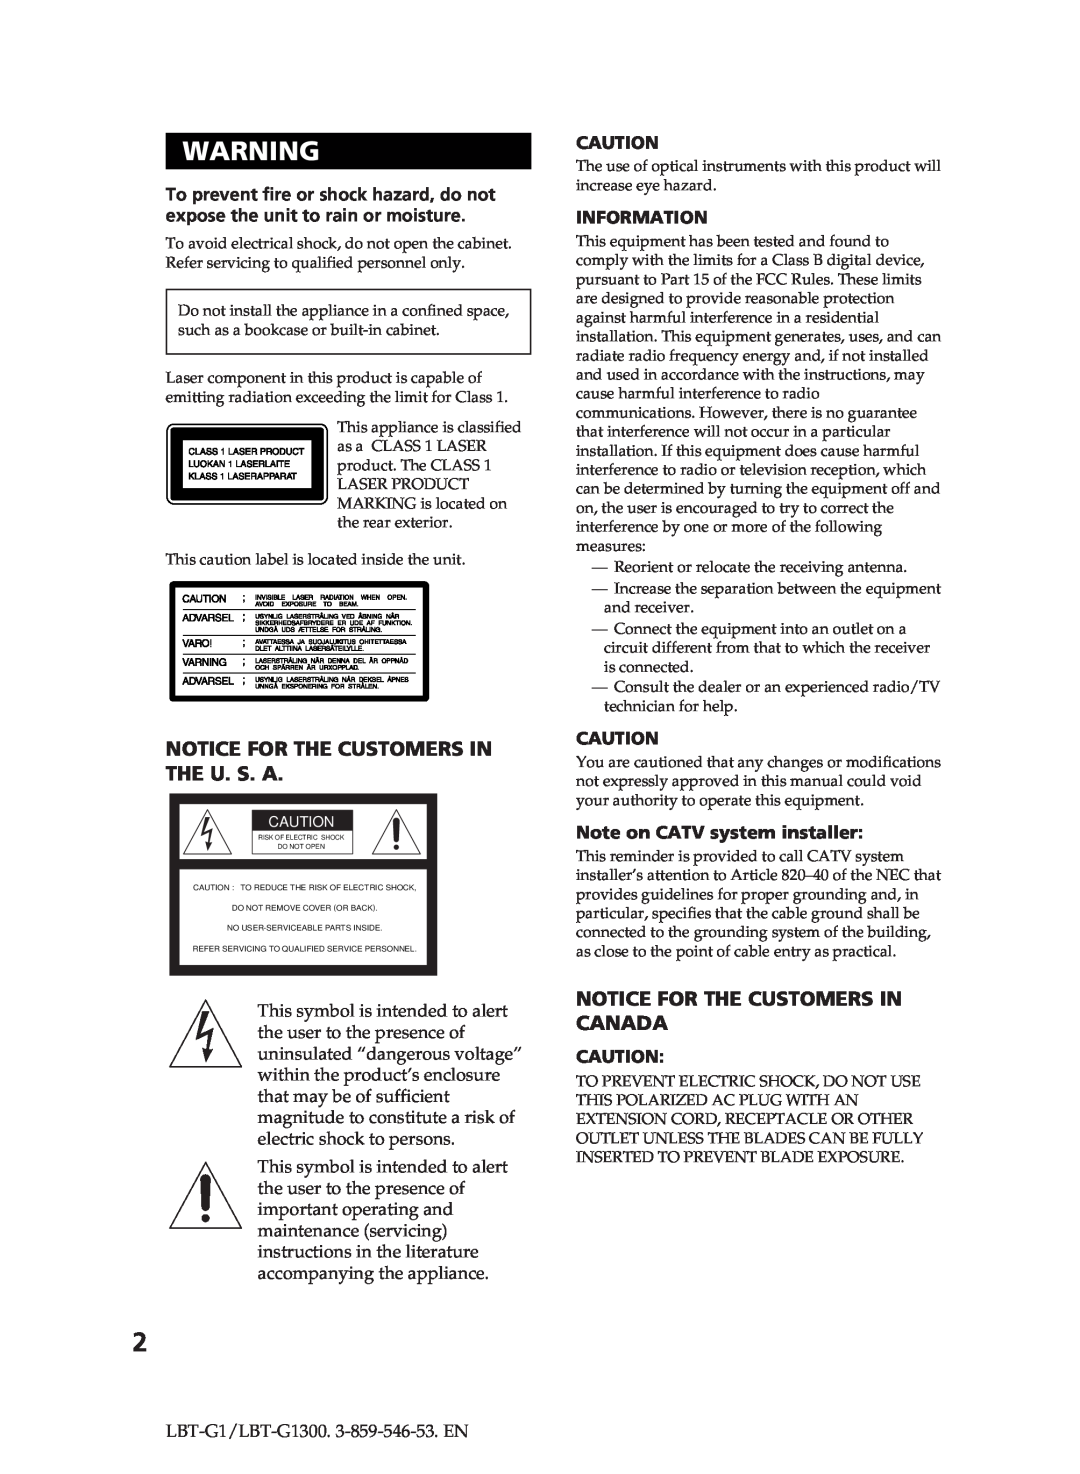 Sony LBT-G1300 manual Notice For The Customers In The U. S. A, Notice For The Customers In Canada, Information 